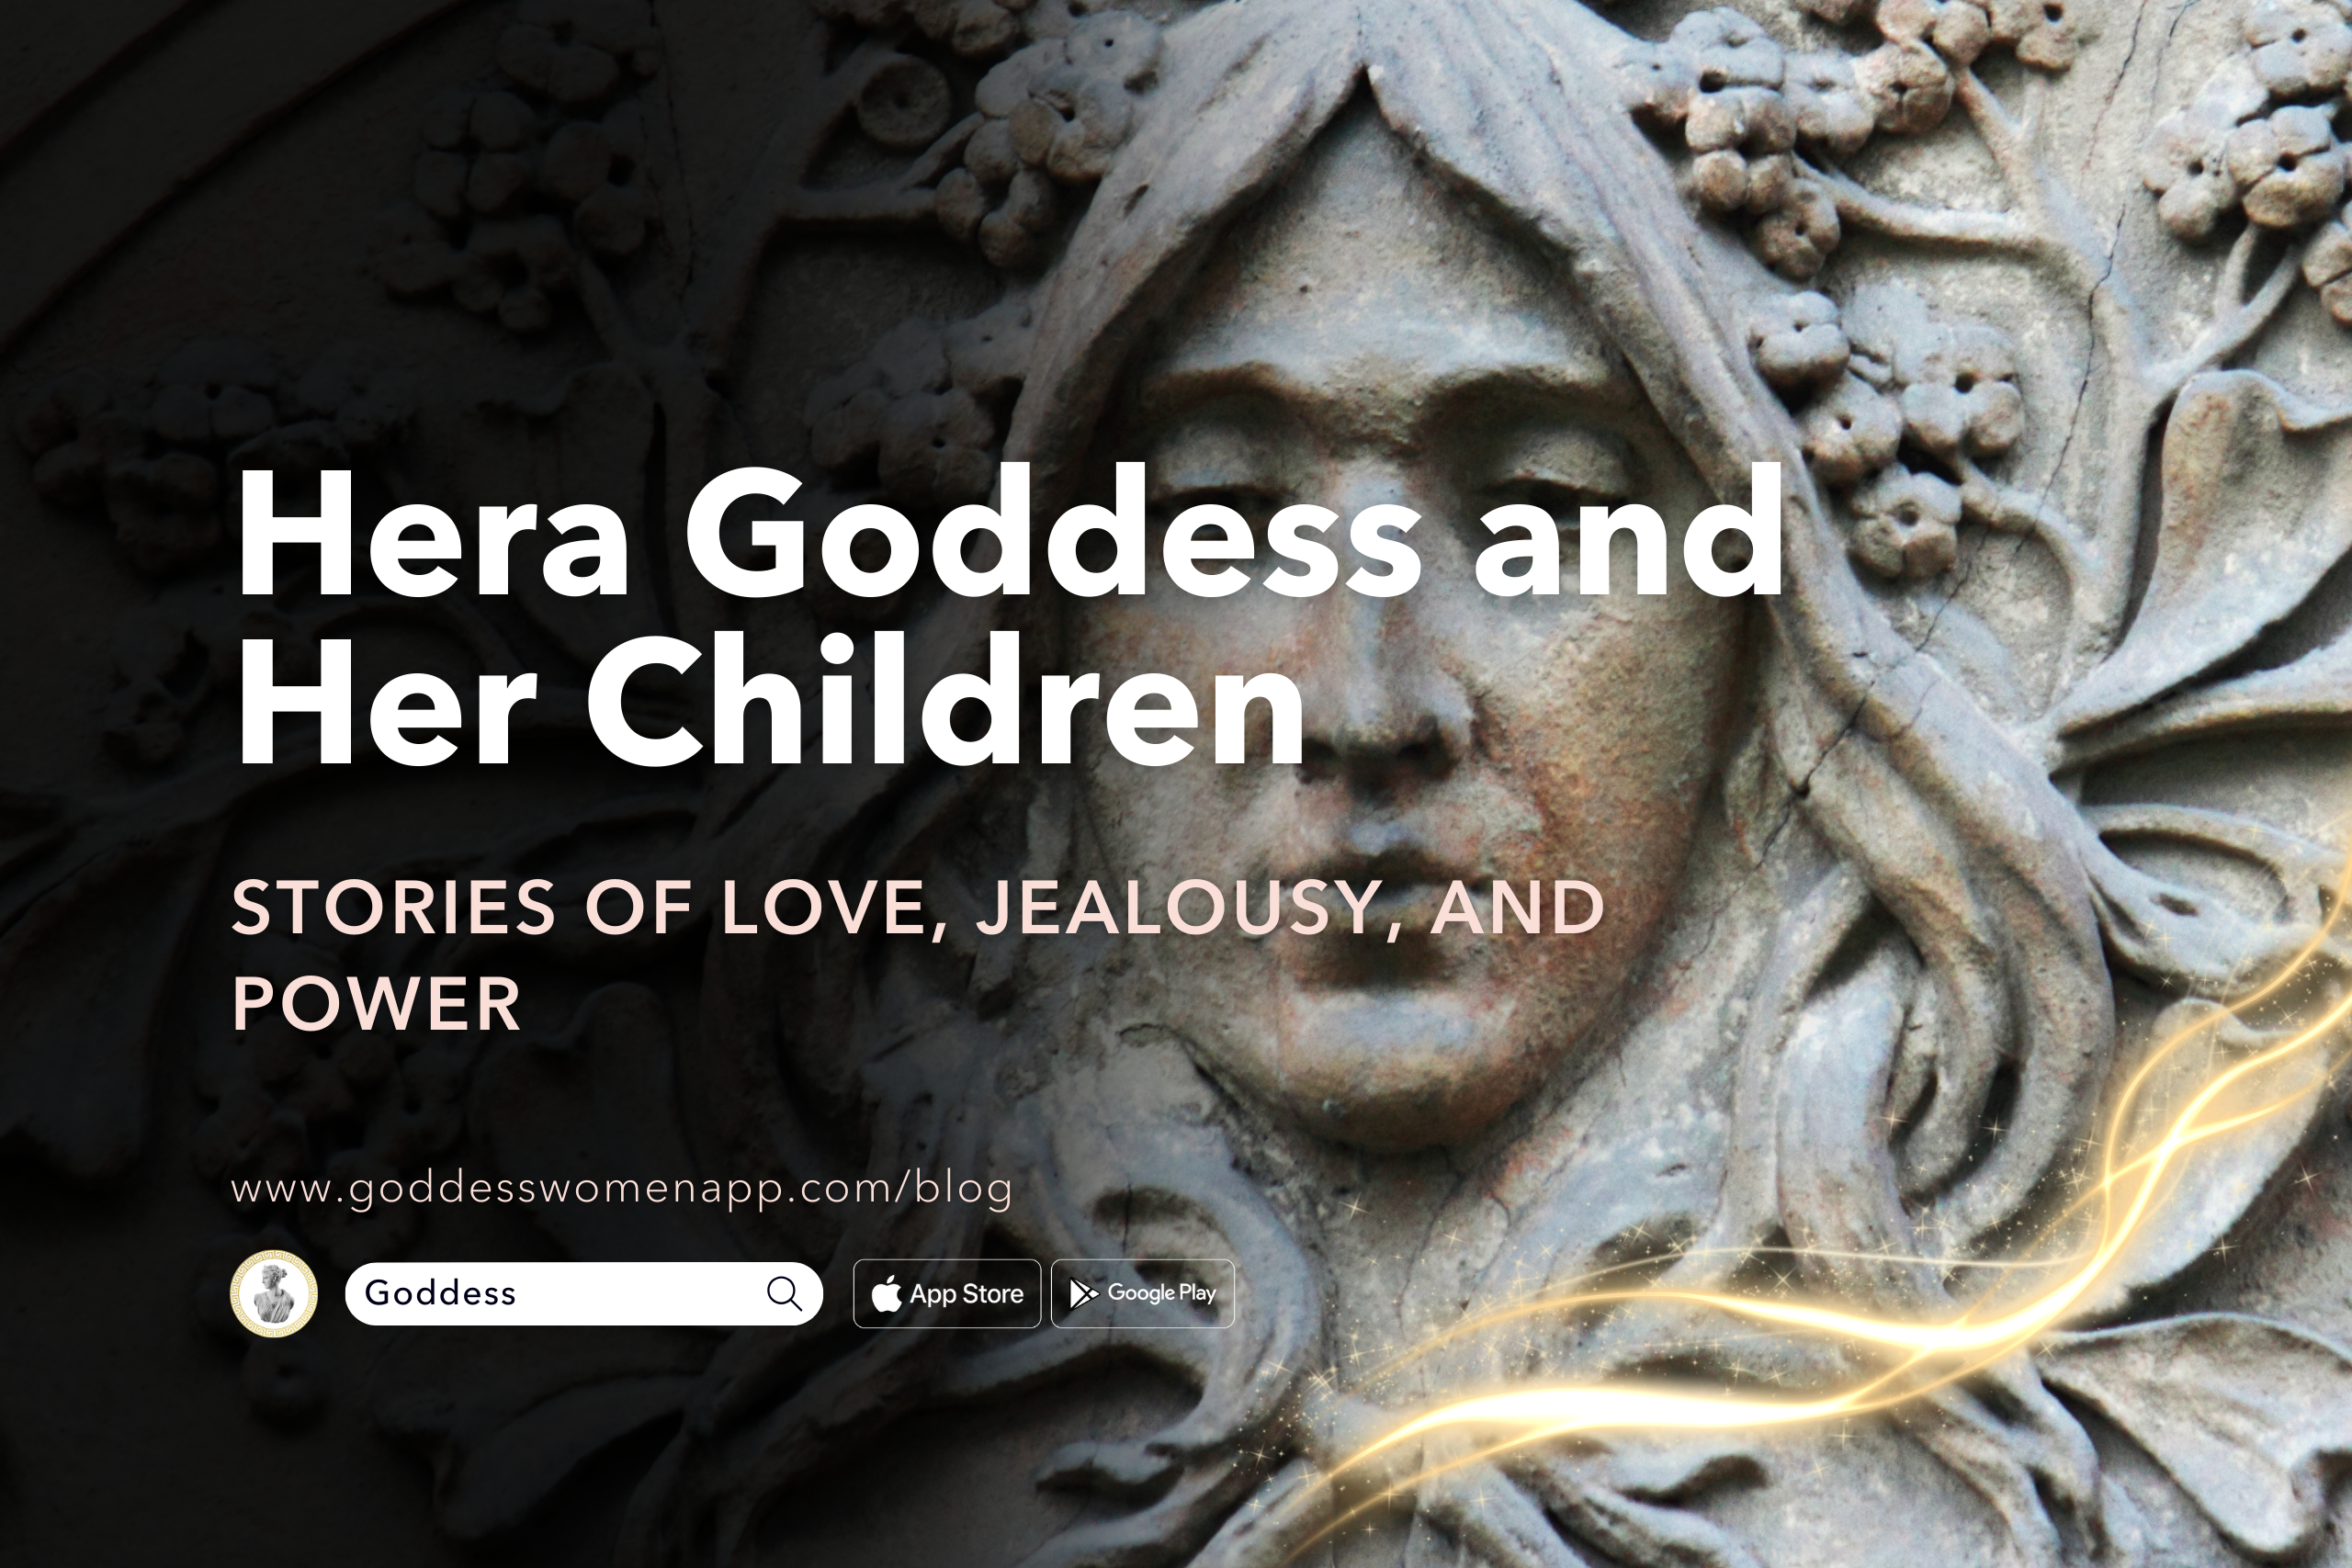 Hera Goddess and Her Children: Best Stories of Love, Jealousy, and Power